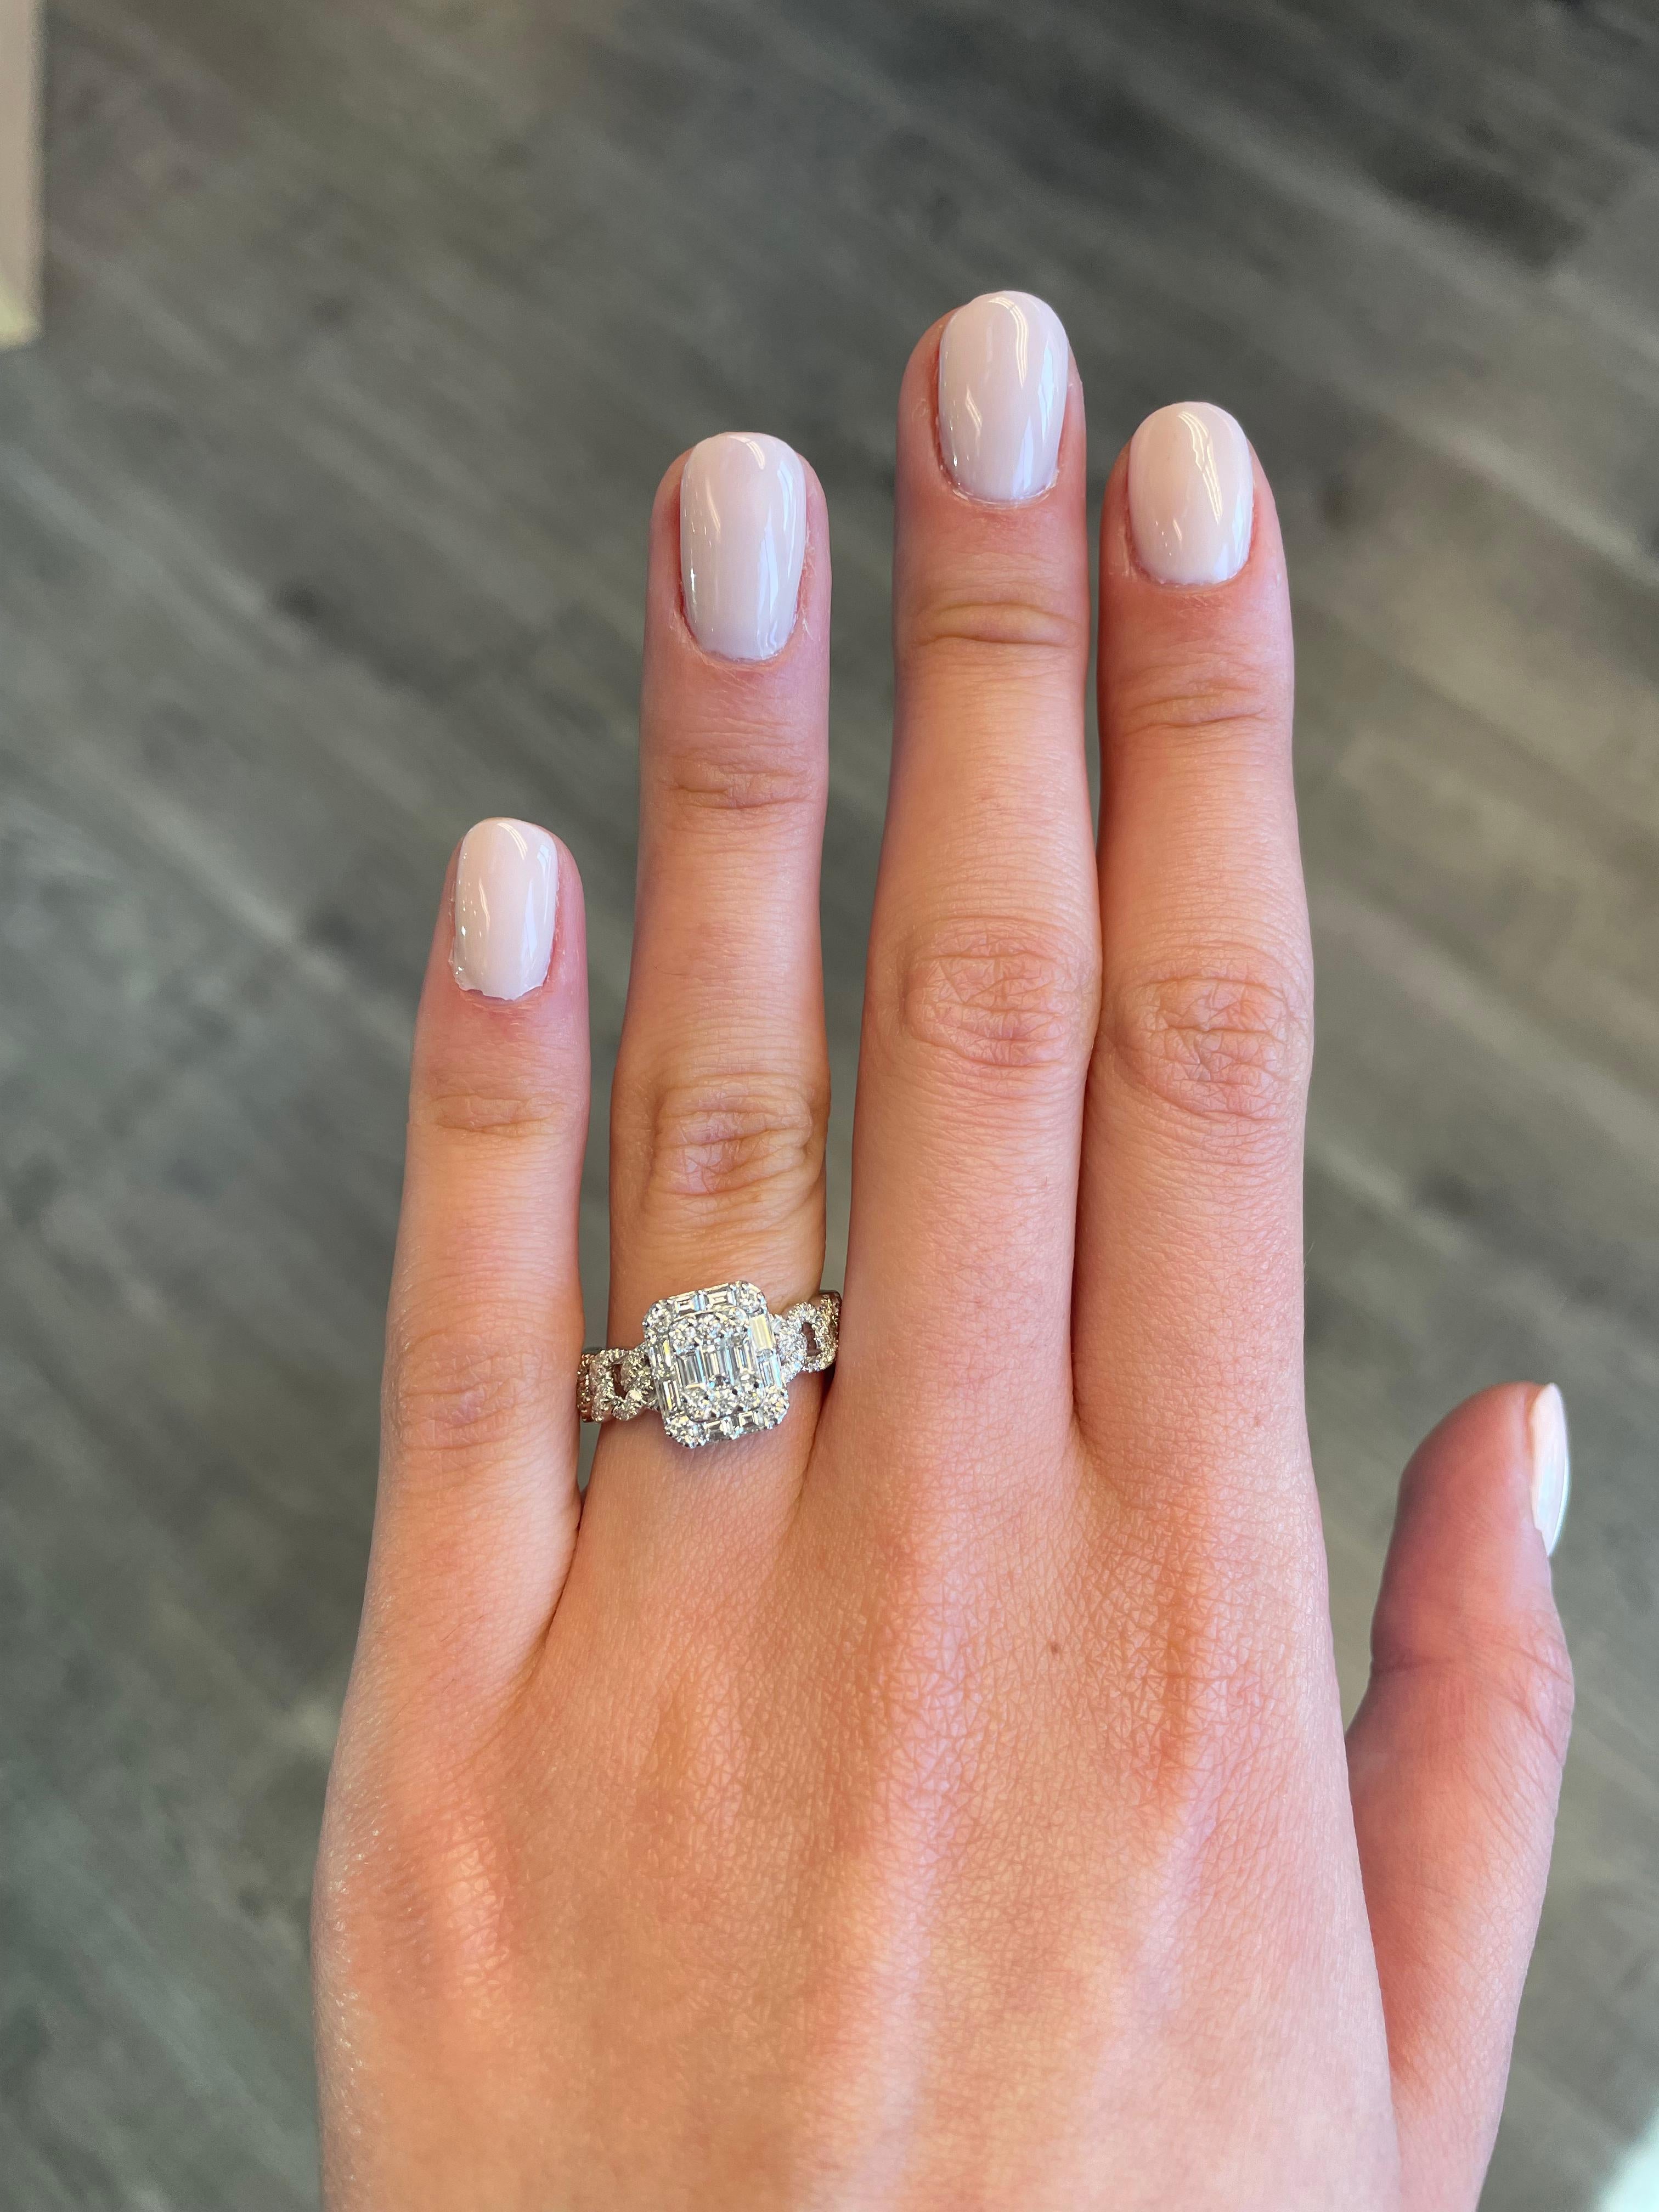 Stunning modern and unique illusion diamond ring. Set to look like an emerald cut diamond and cuban link wrap. By Alexander of Beverly Hills.
1.02 carats of round and baguette cut diamonds, approximately G/H color and VS2/SI1 clarity. 18-karat white